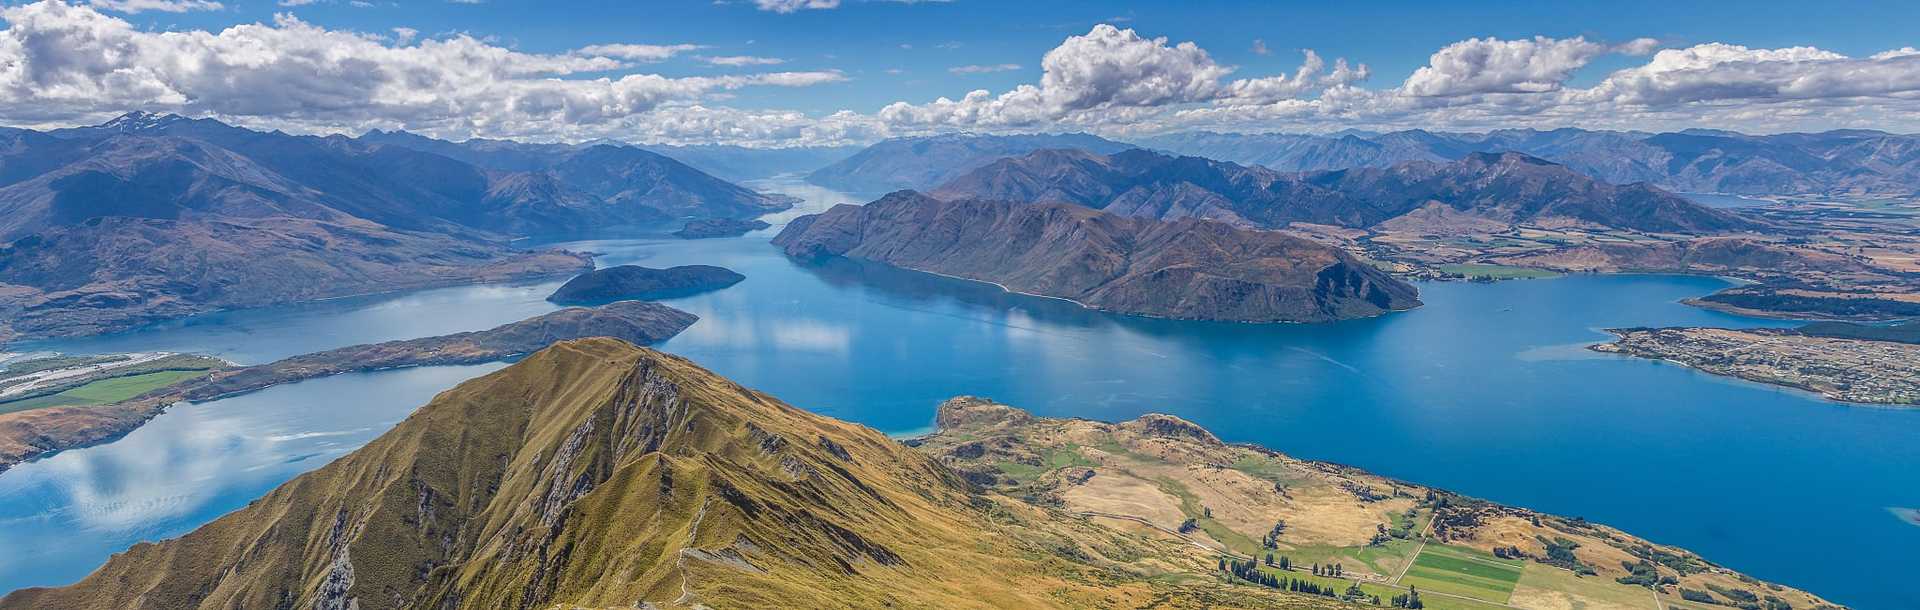 View of Lake Wanaka and surrounding mountains from Roys Peak, on the South Island of New Zealand.